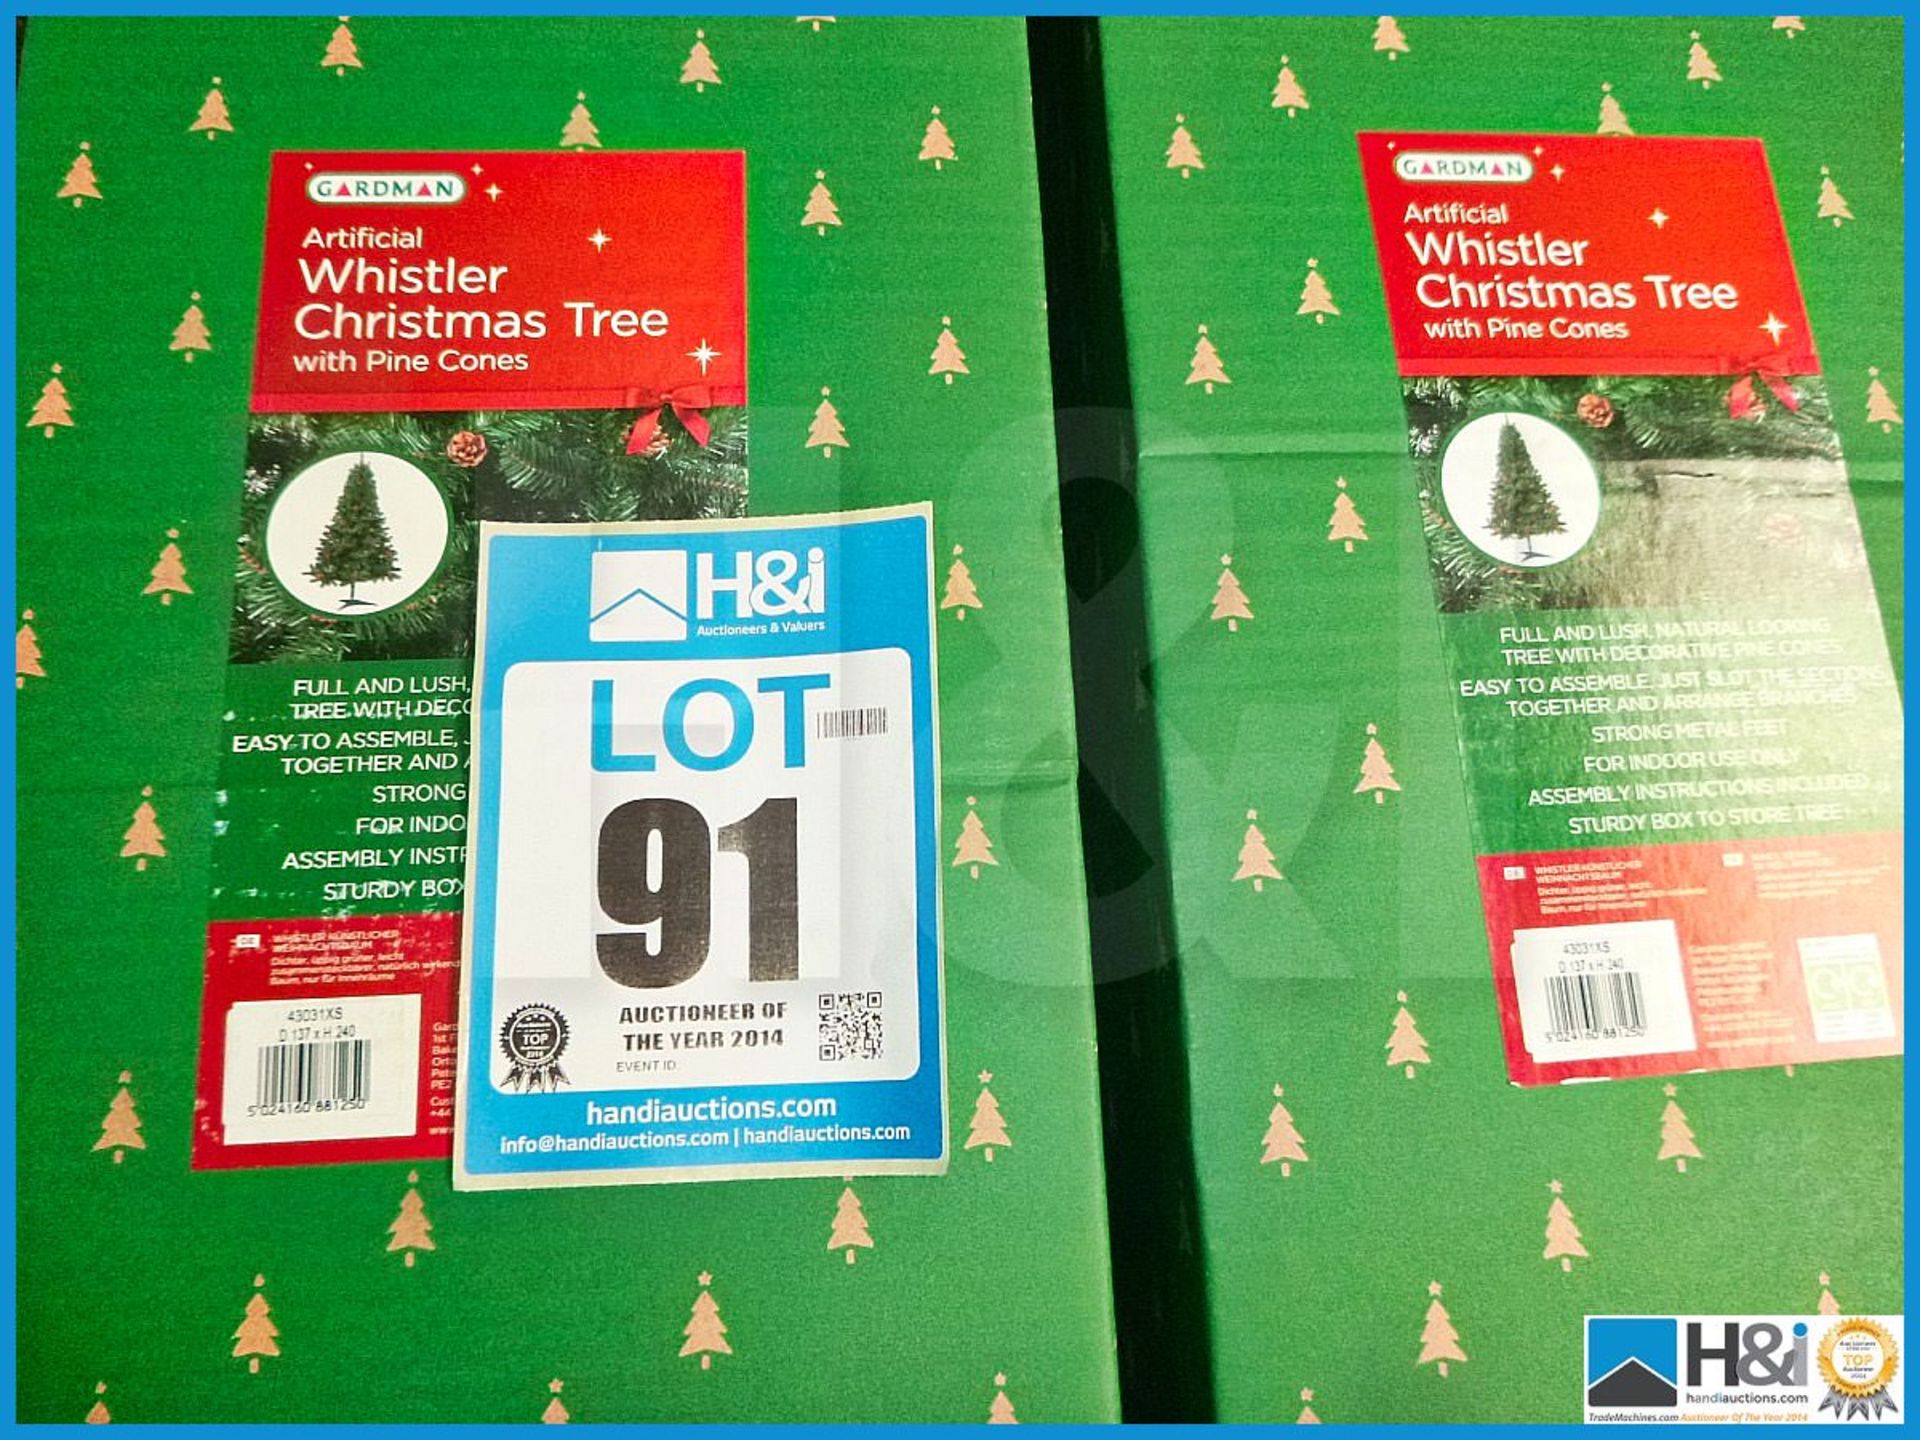 GARDMAN ARTIFICIAL 8' WHISTLER CHRISTMAS TREE WITH CONES , 43031XS, RRP £89.99, FULL AND LUSH NATURA